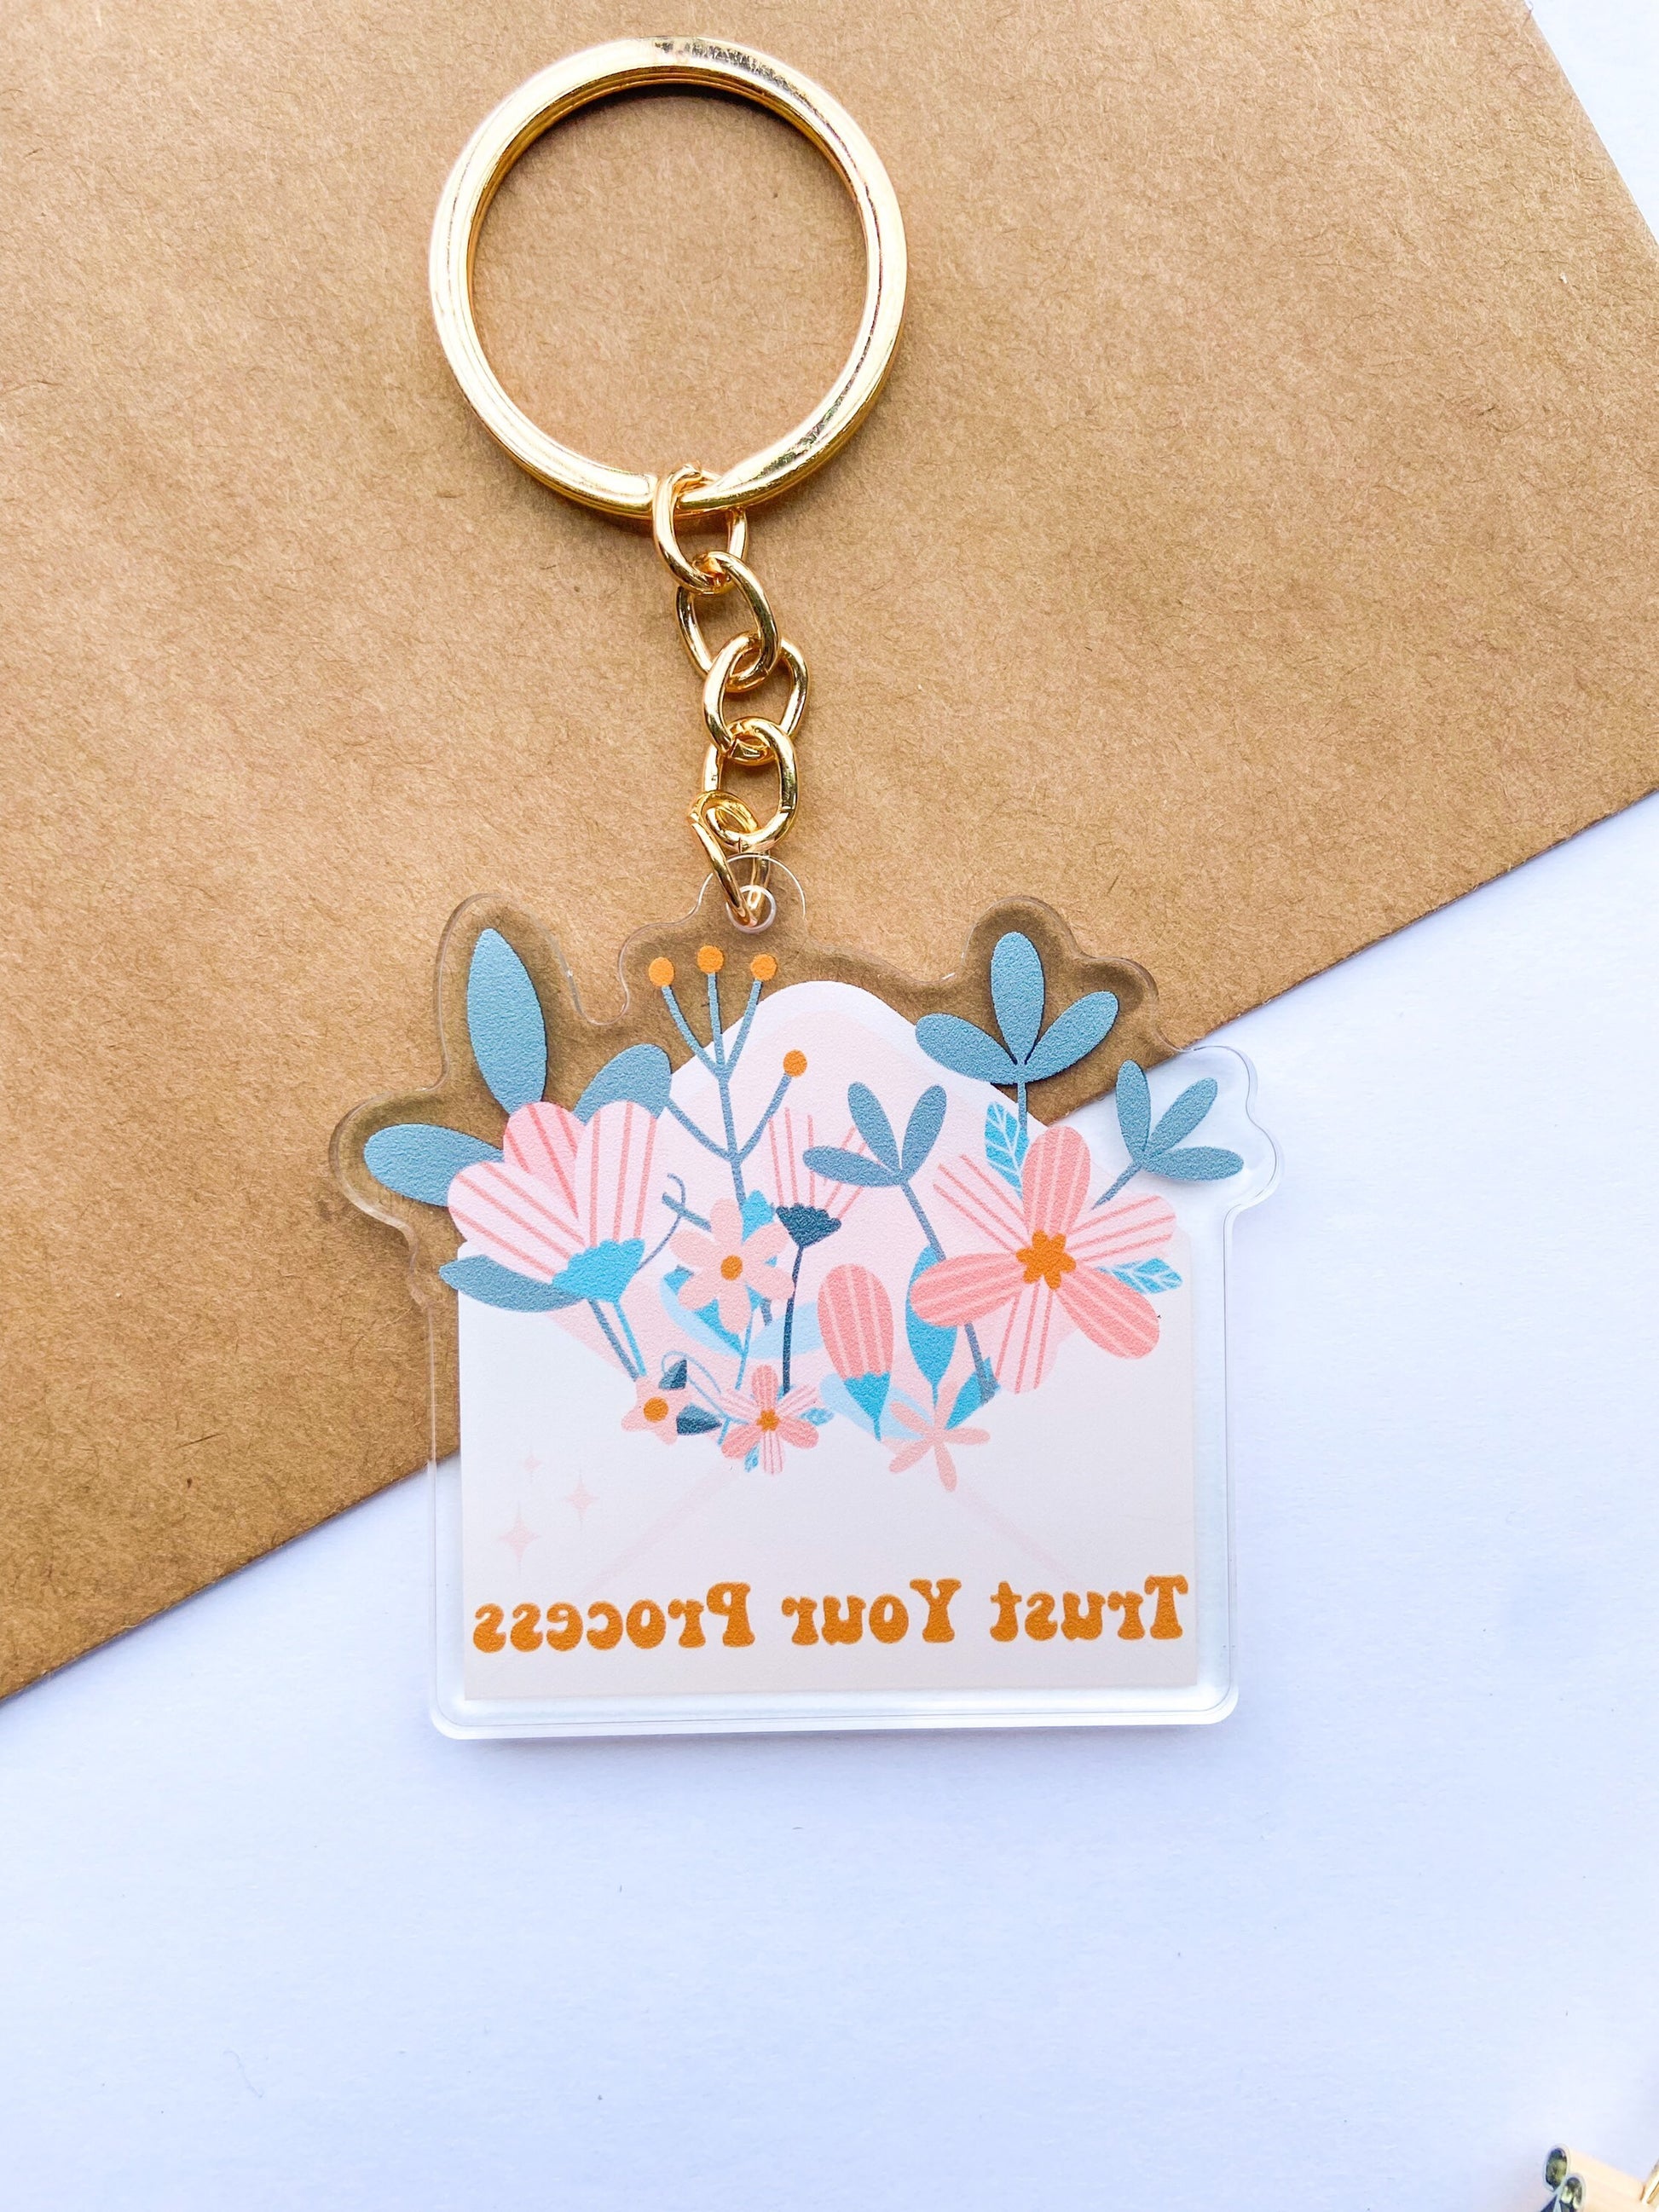 Floral Mental Health Keychain, Trust The Process Keychain, Floral Envelope Keychain, Botanical Keychain, Mental Health Keychain, Acrylic